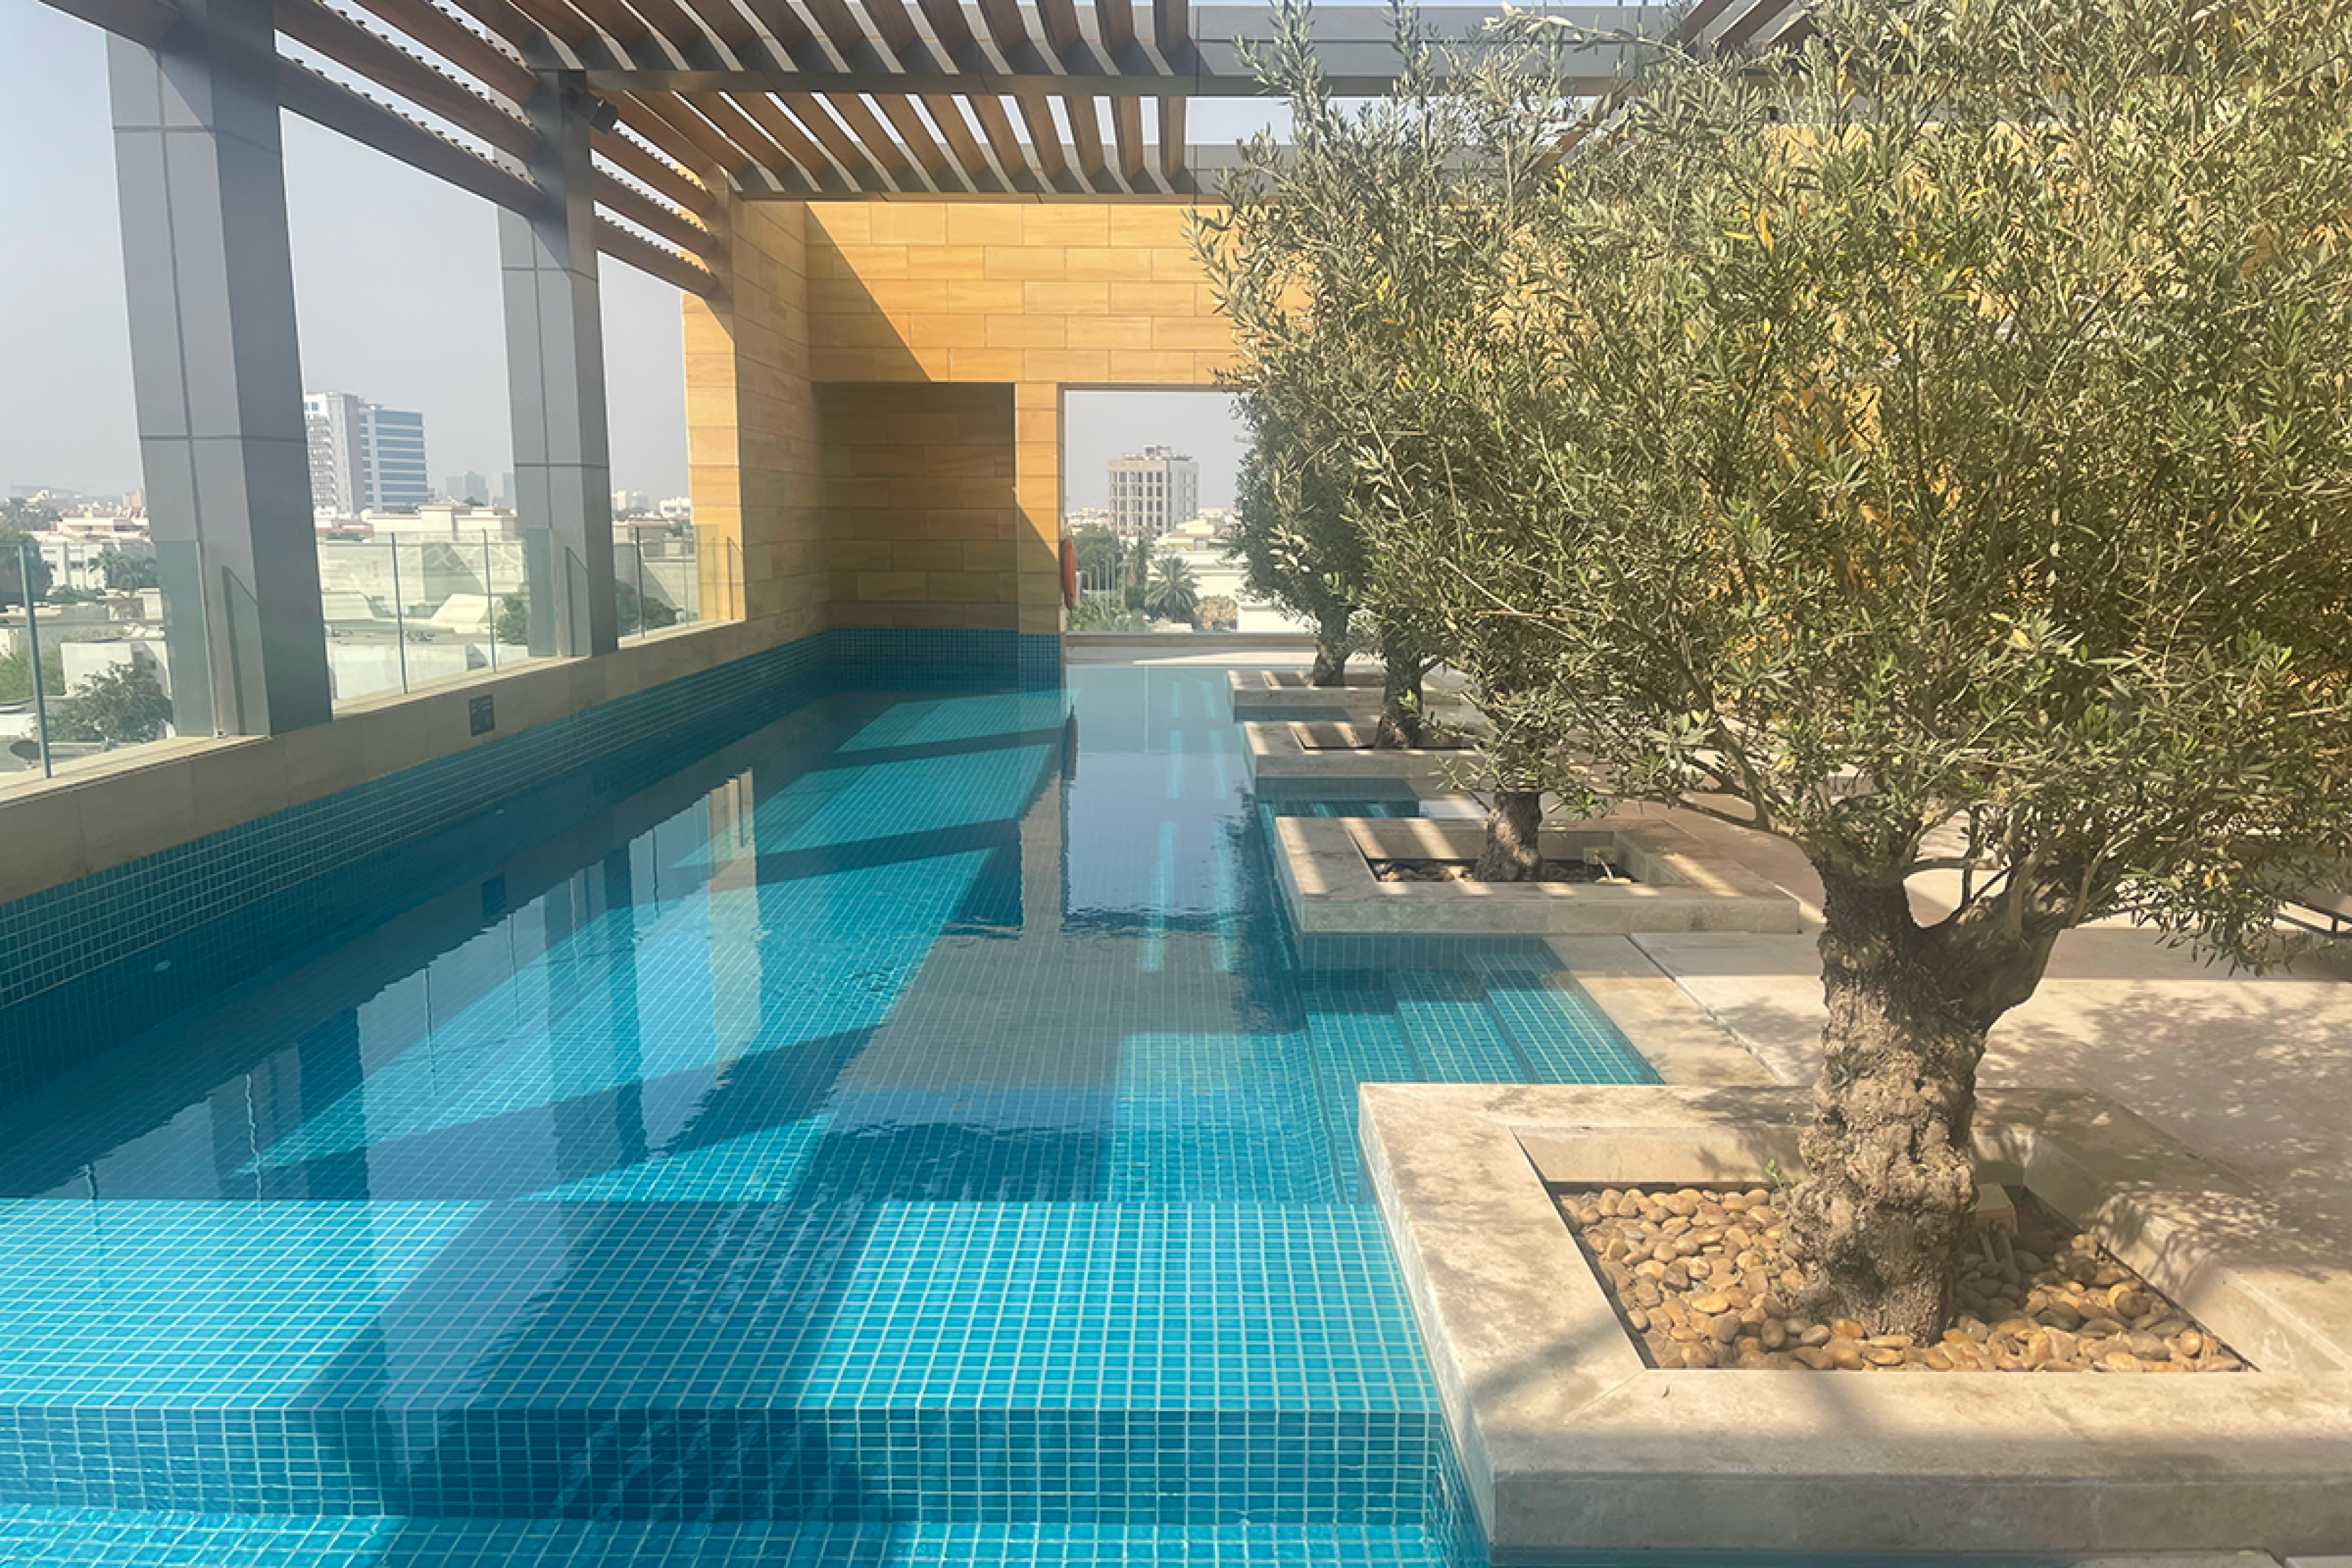 pool lined with olive trees and windows looking over a city